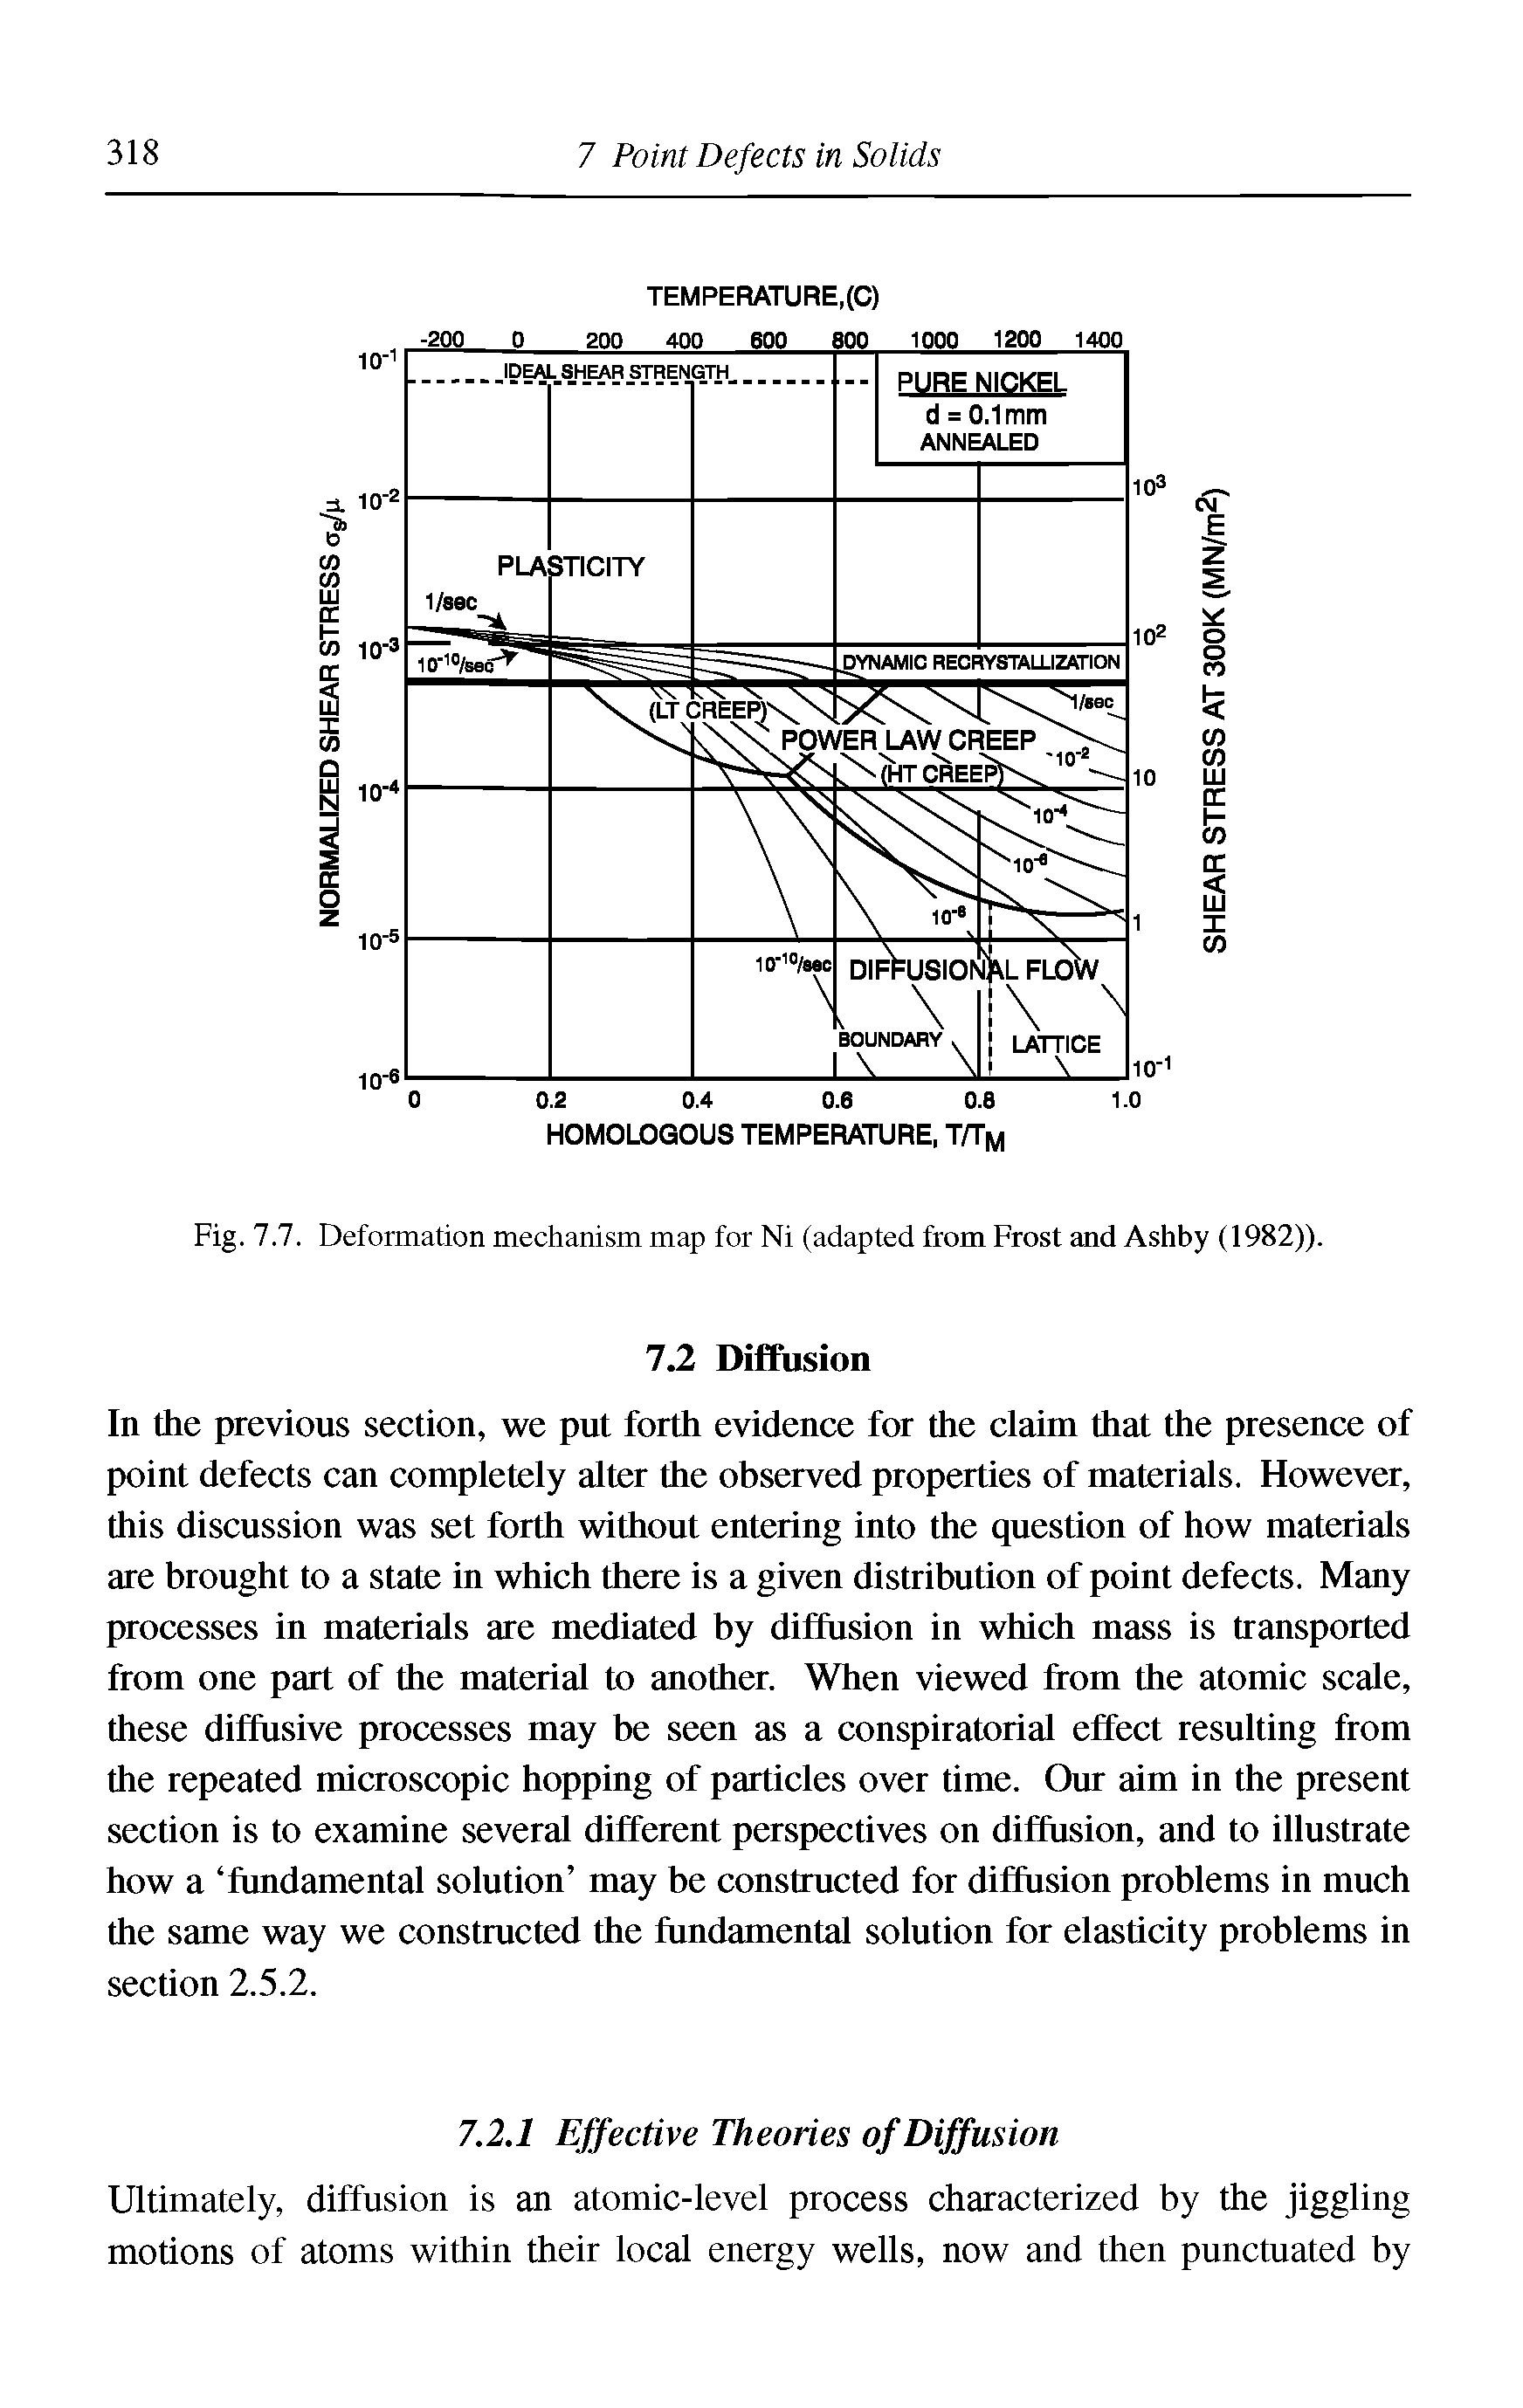 Fig. 7.7. Deformation mechanism map for Ni (adapted from Frost and Ashby (1982)).